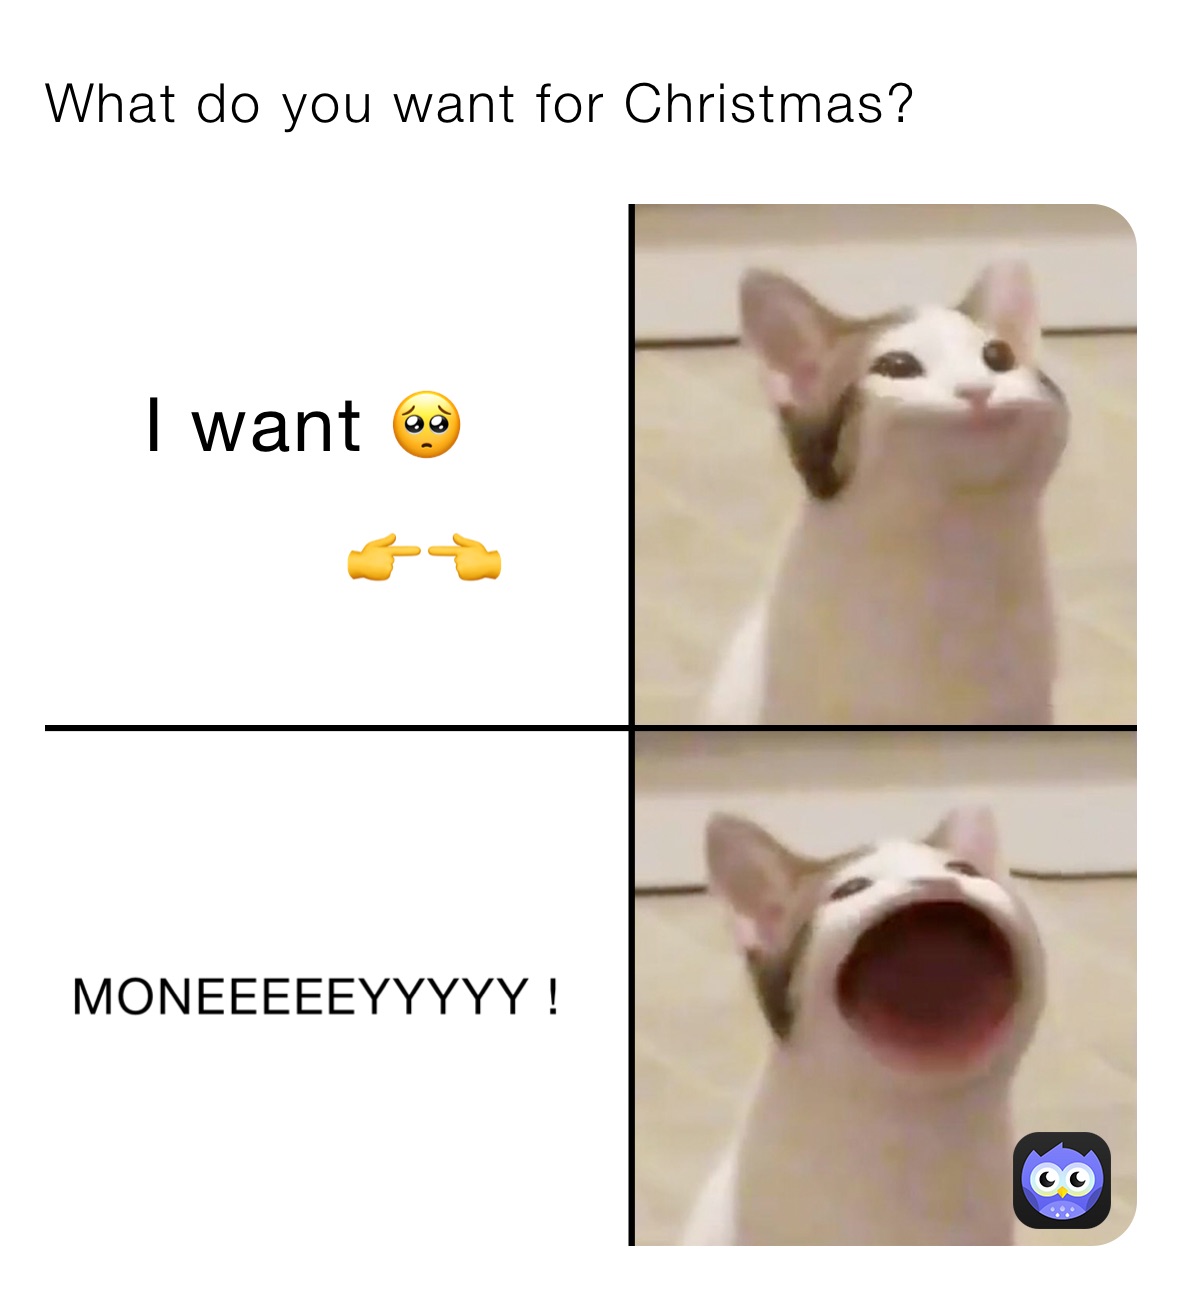 What do you want for Christmas?